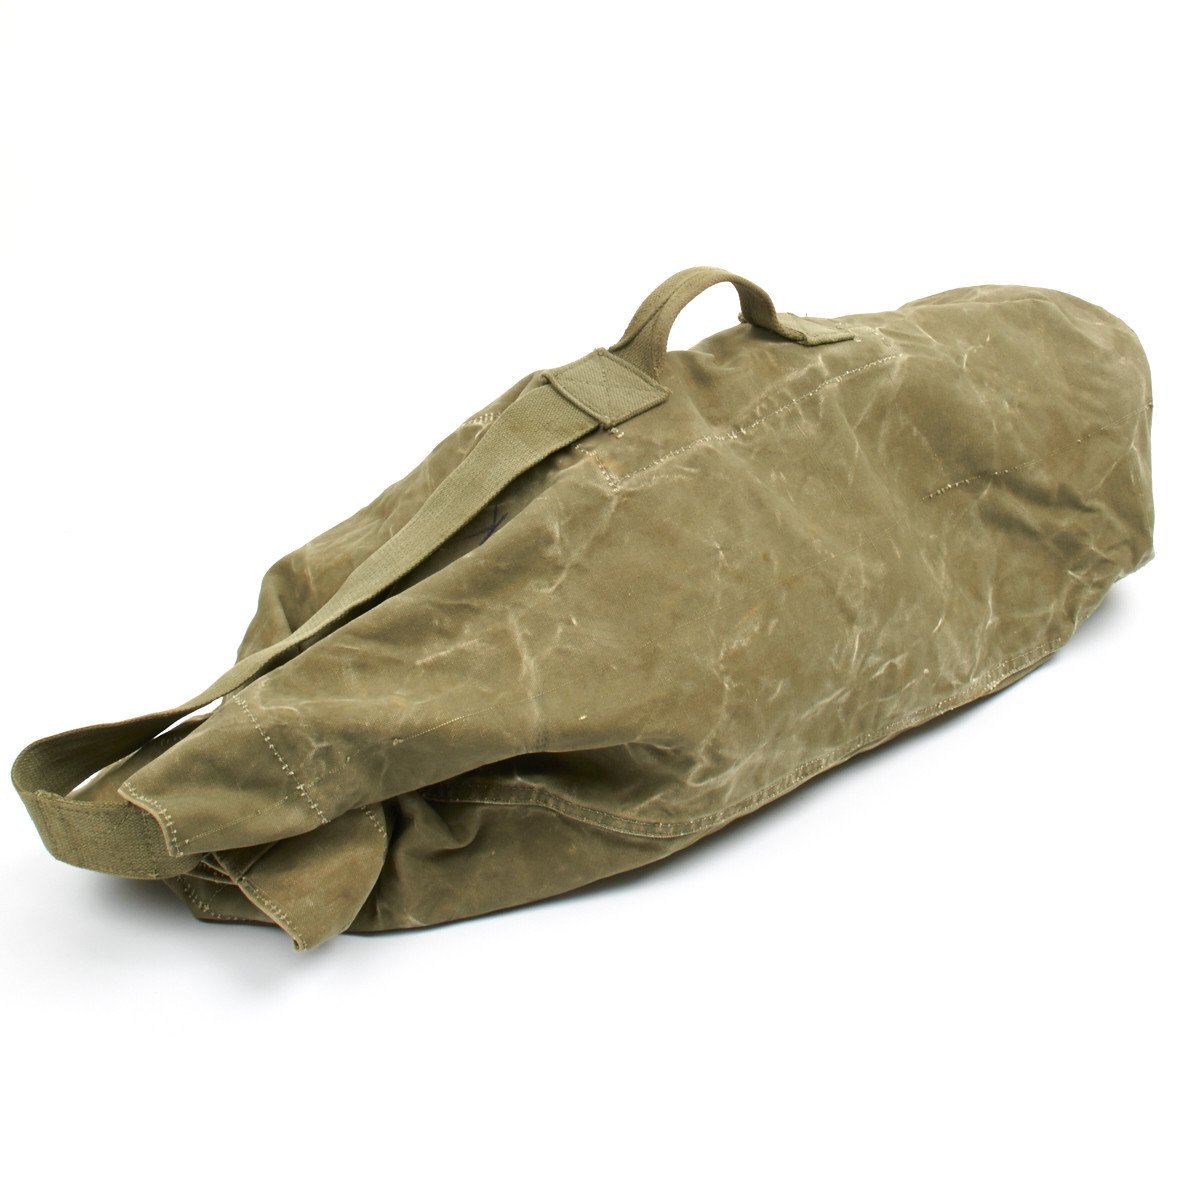 Czech Army Extra Large Canvas Duffle Bag